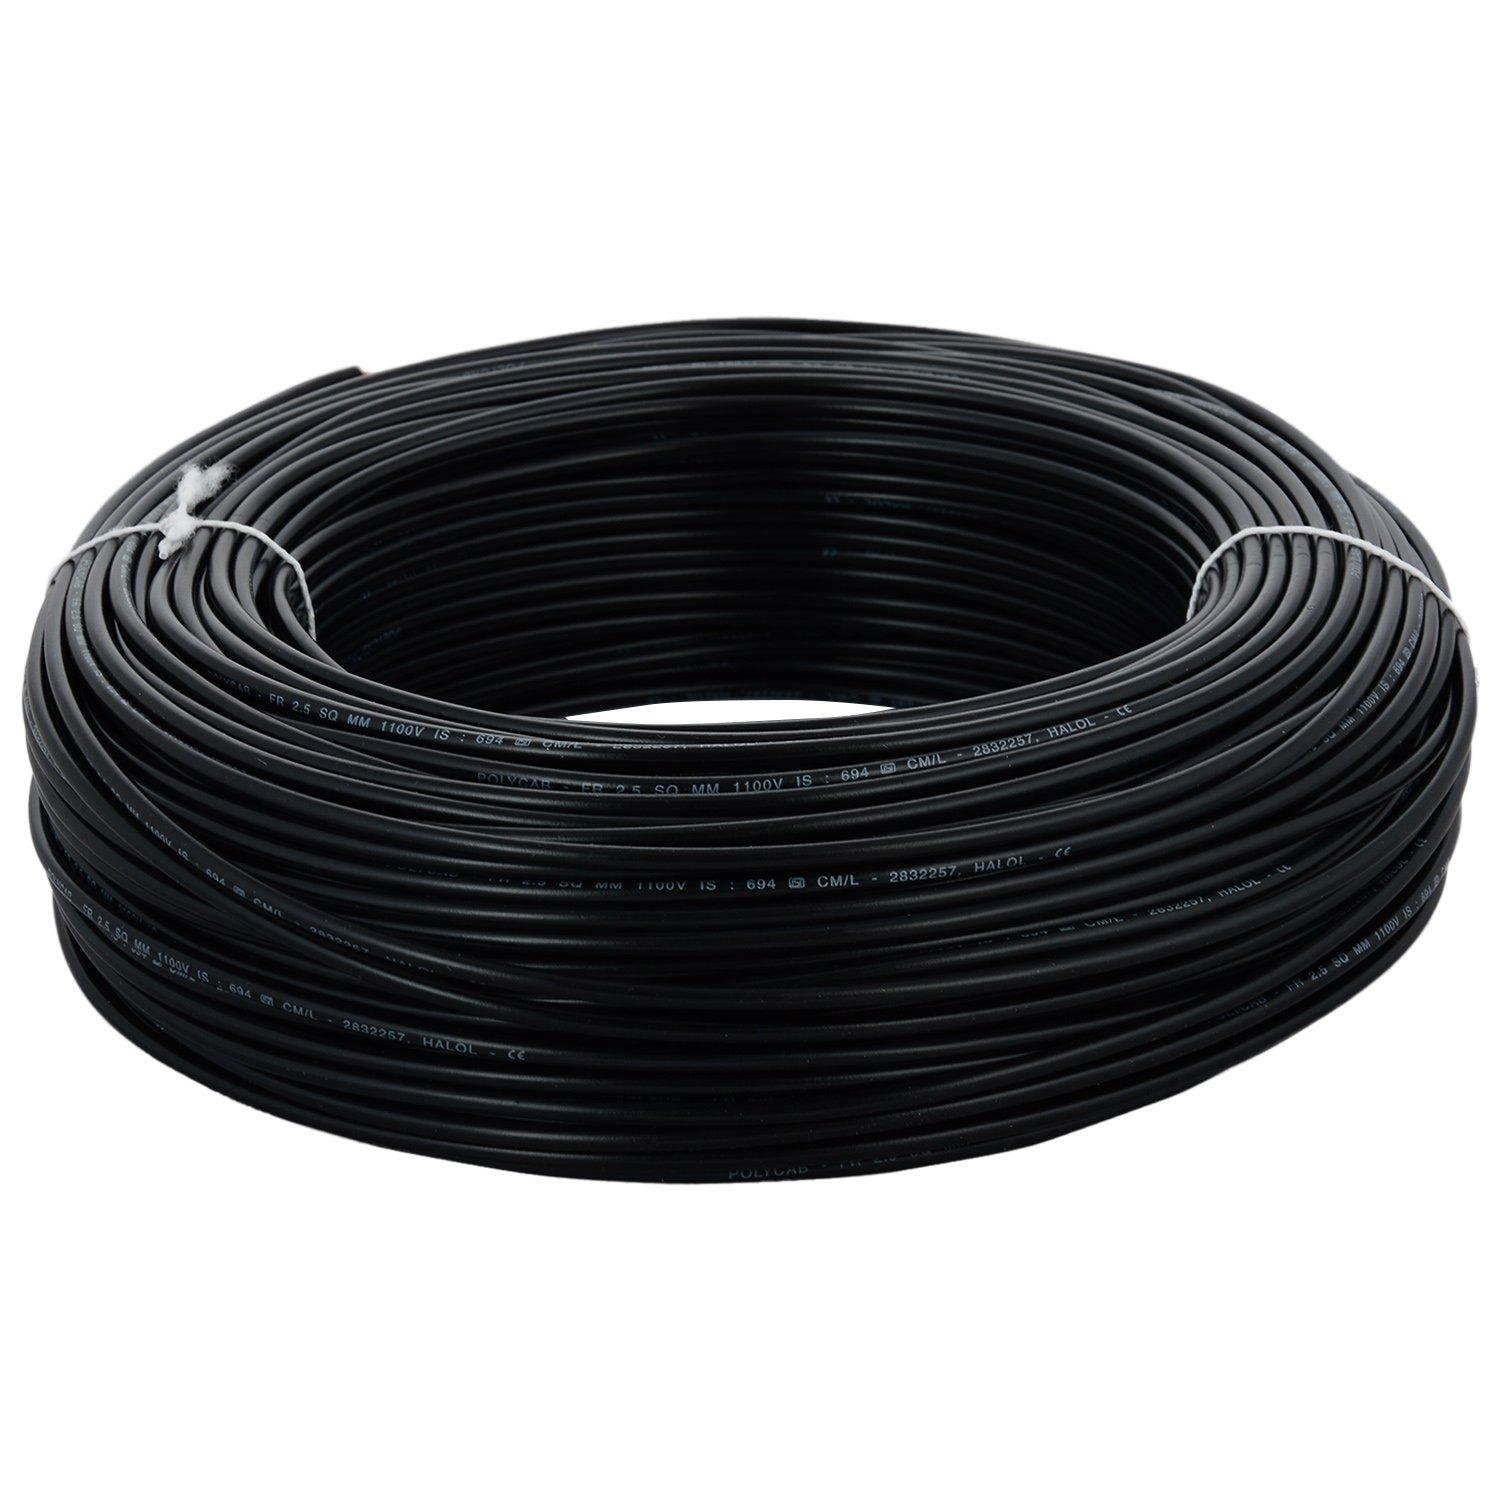 Purchase Solid 3 X 2.5 Mm Cable At The Best Prices 